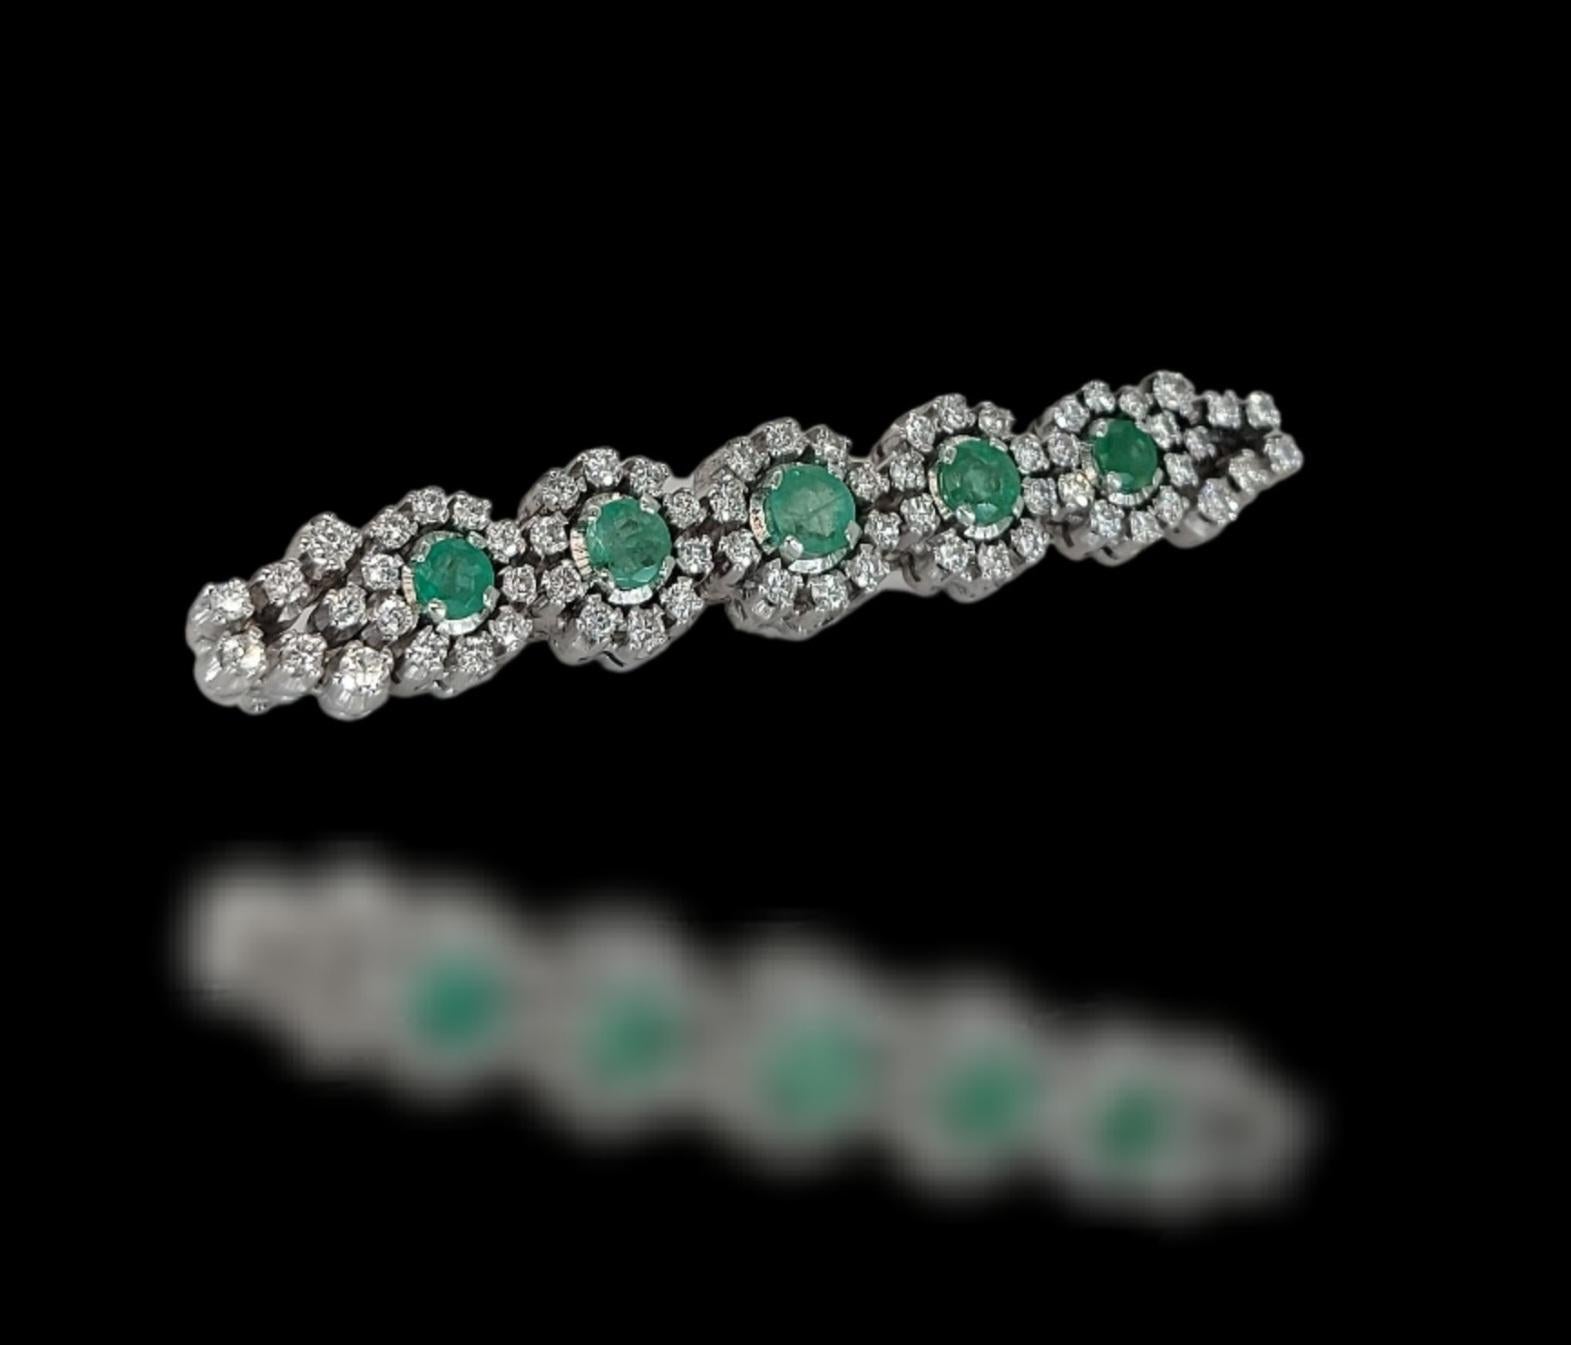 Stunning 18kt White Gold Brooch With Emeralds & Diamonds

Diamonds 64 diamonds together approx. 2.7 ct

Emerald: 5 Emeralds together 1.9 ct

Material: 18kt white gold

Measurements: 64 mm x 10.8 mm

Total weight: 17.1 gram / 0.605 oz / 11 dwt